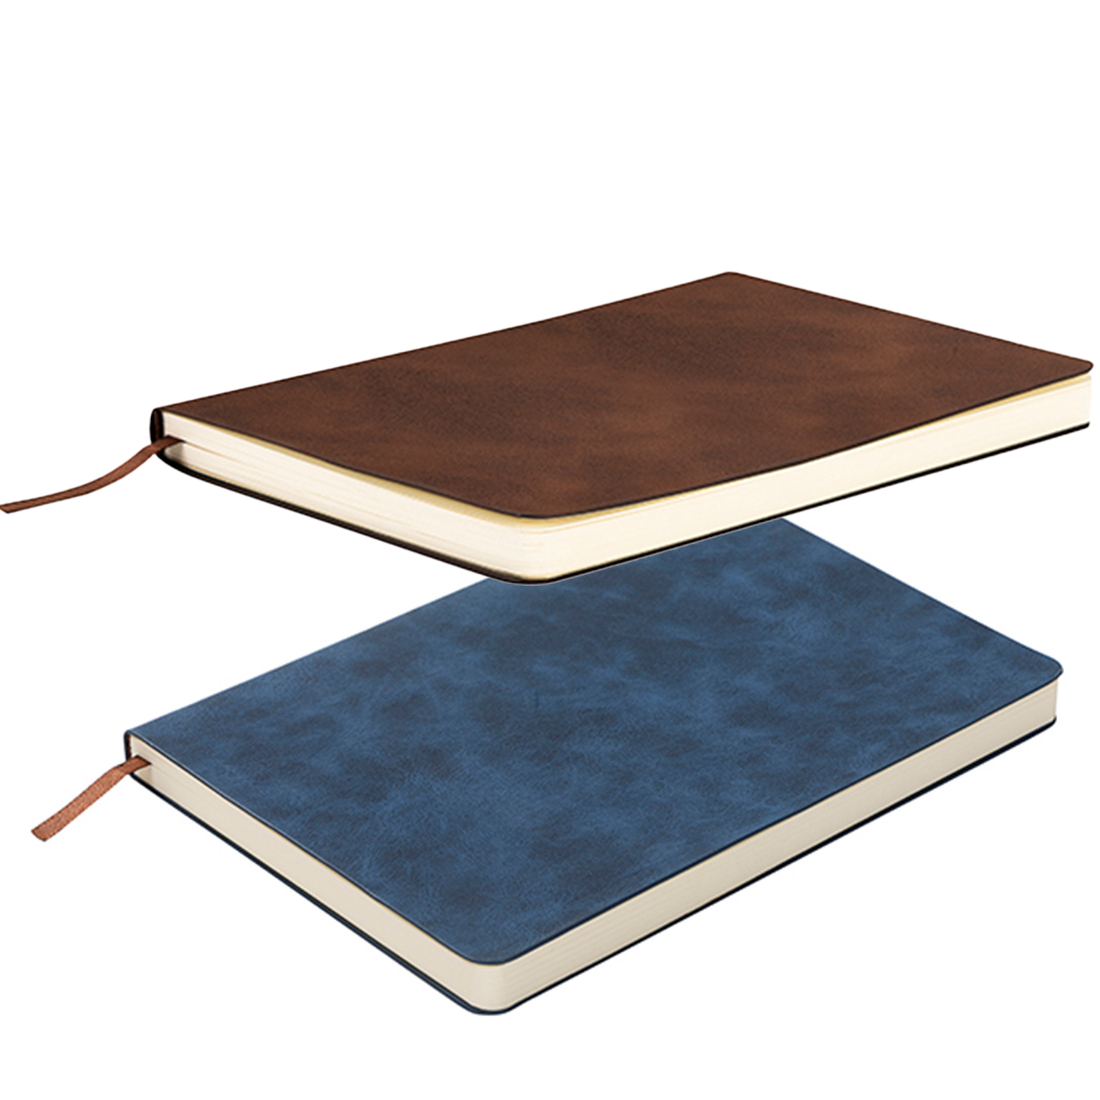 Engravable PU Leather Notebook - Pack of 5 - Joto Imaging Supplies Canada